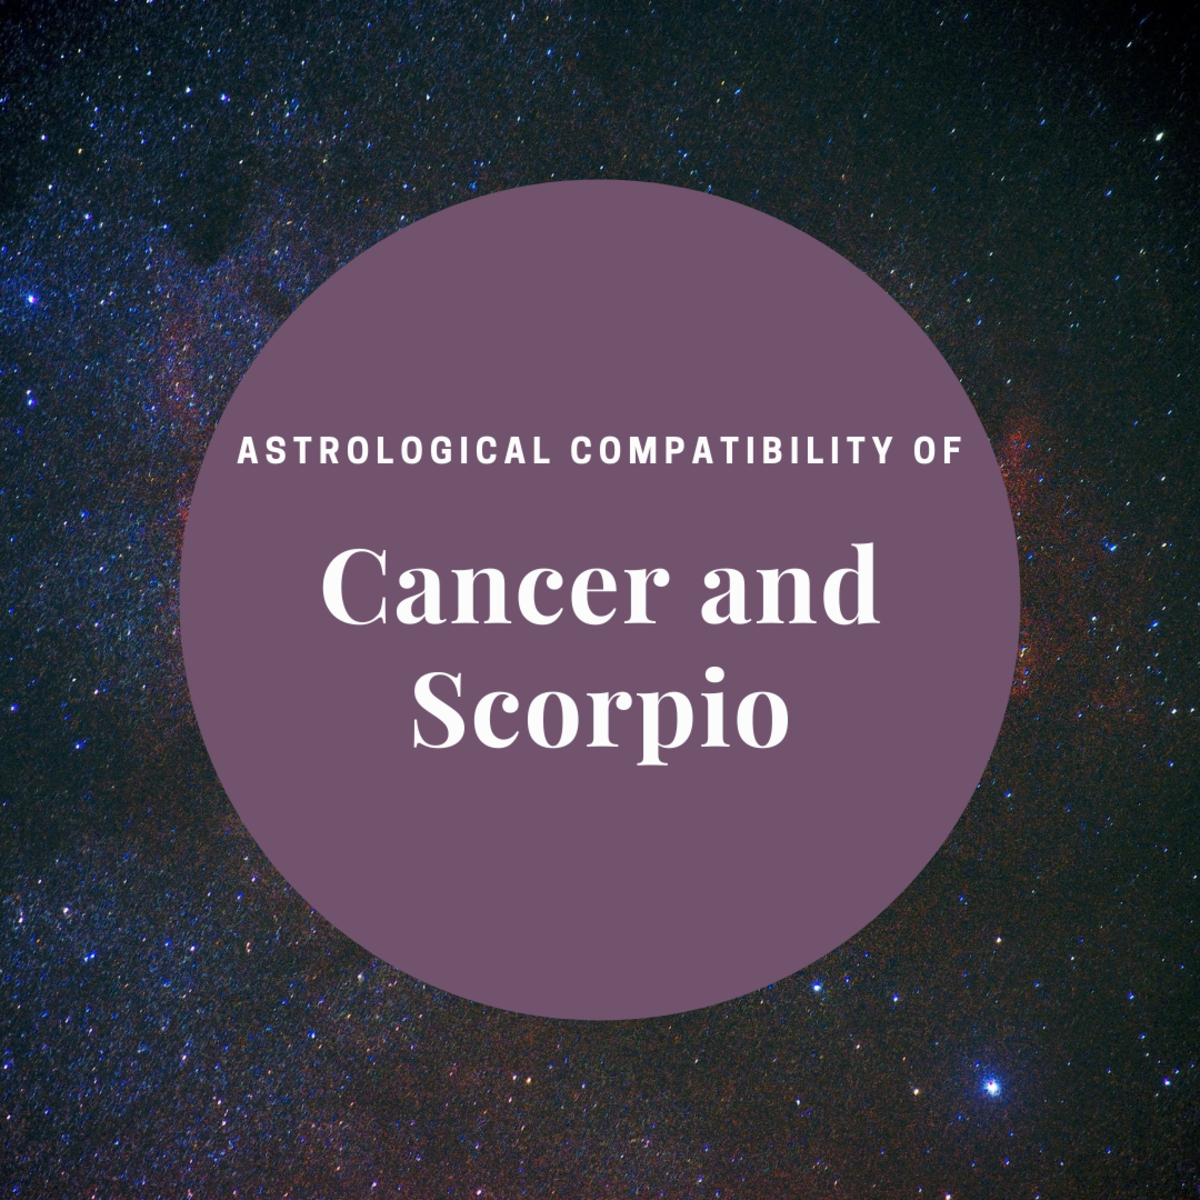 Are these two zodiac signs compatible?